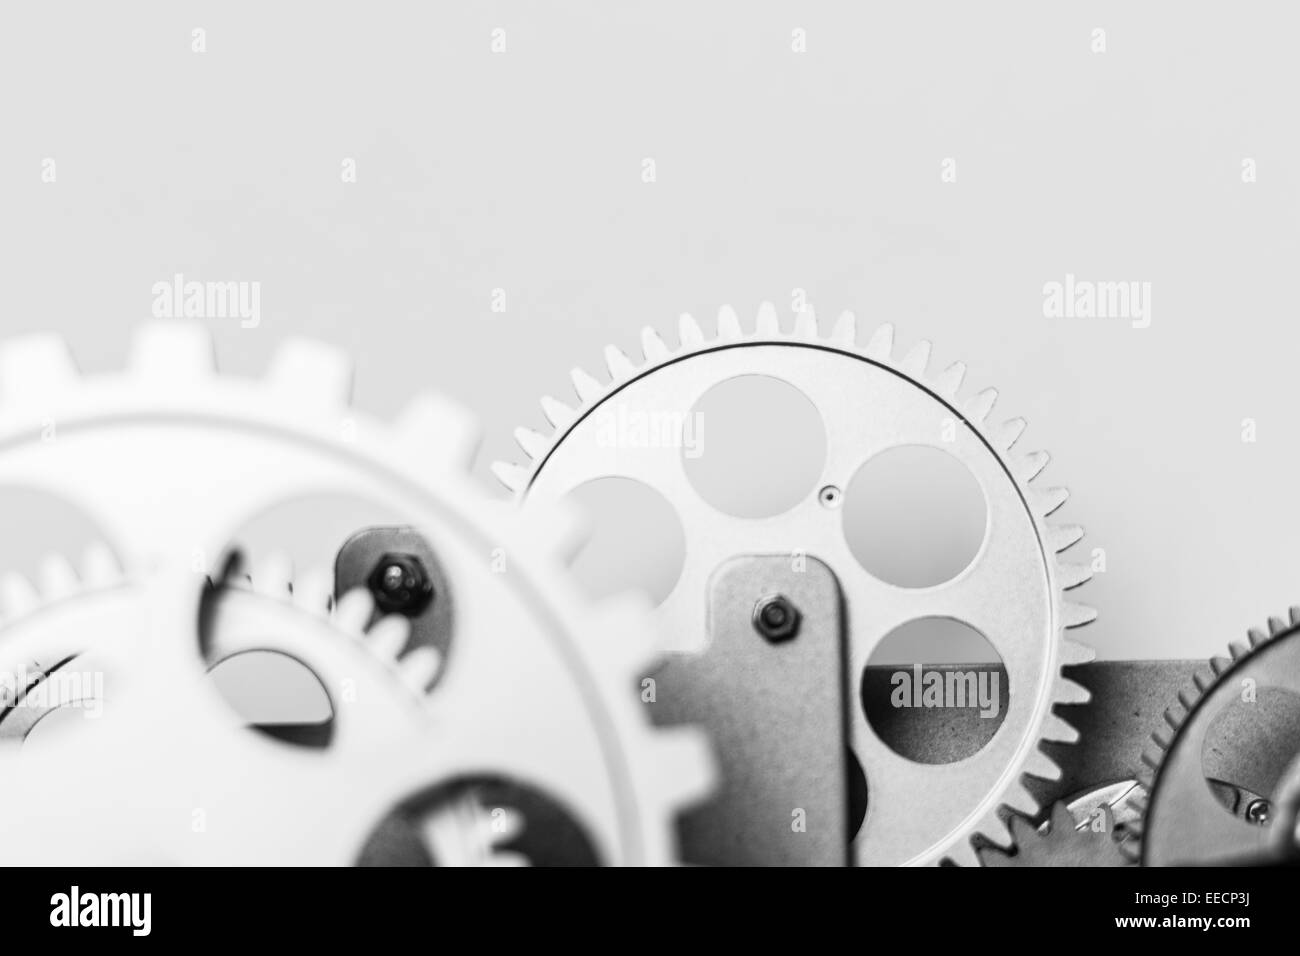 A group of silver gears functioning together in a precision machinery Stock Photo